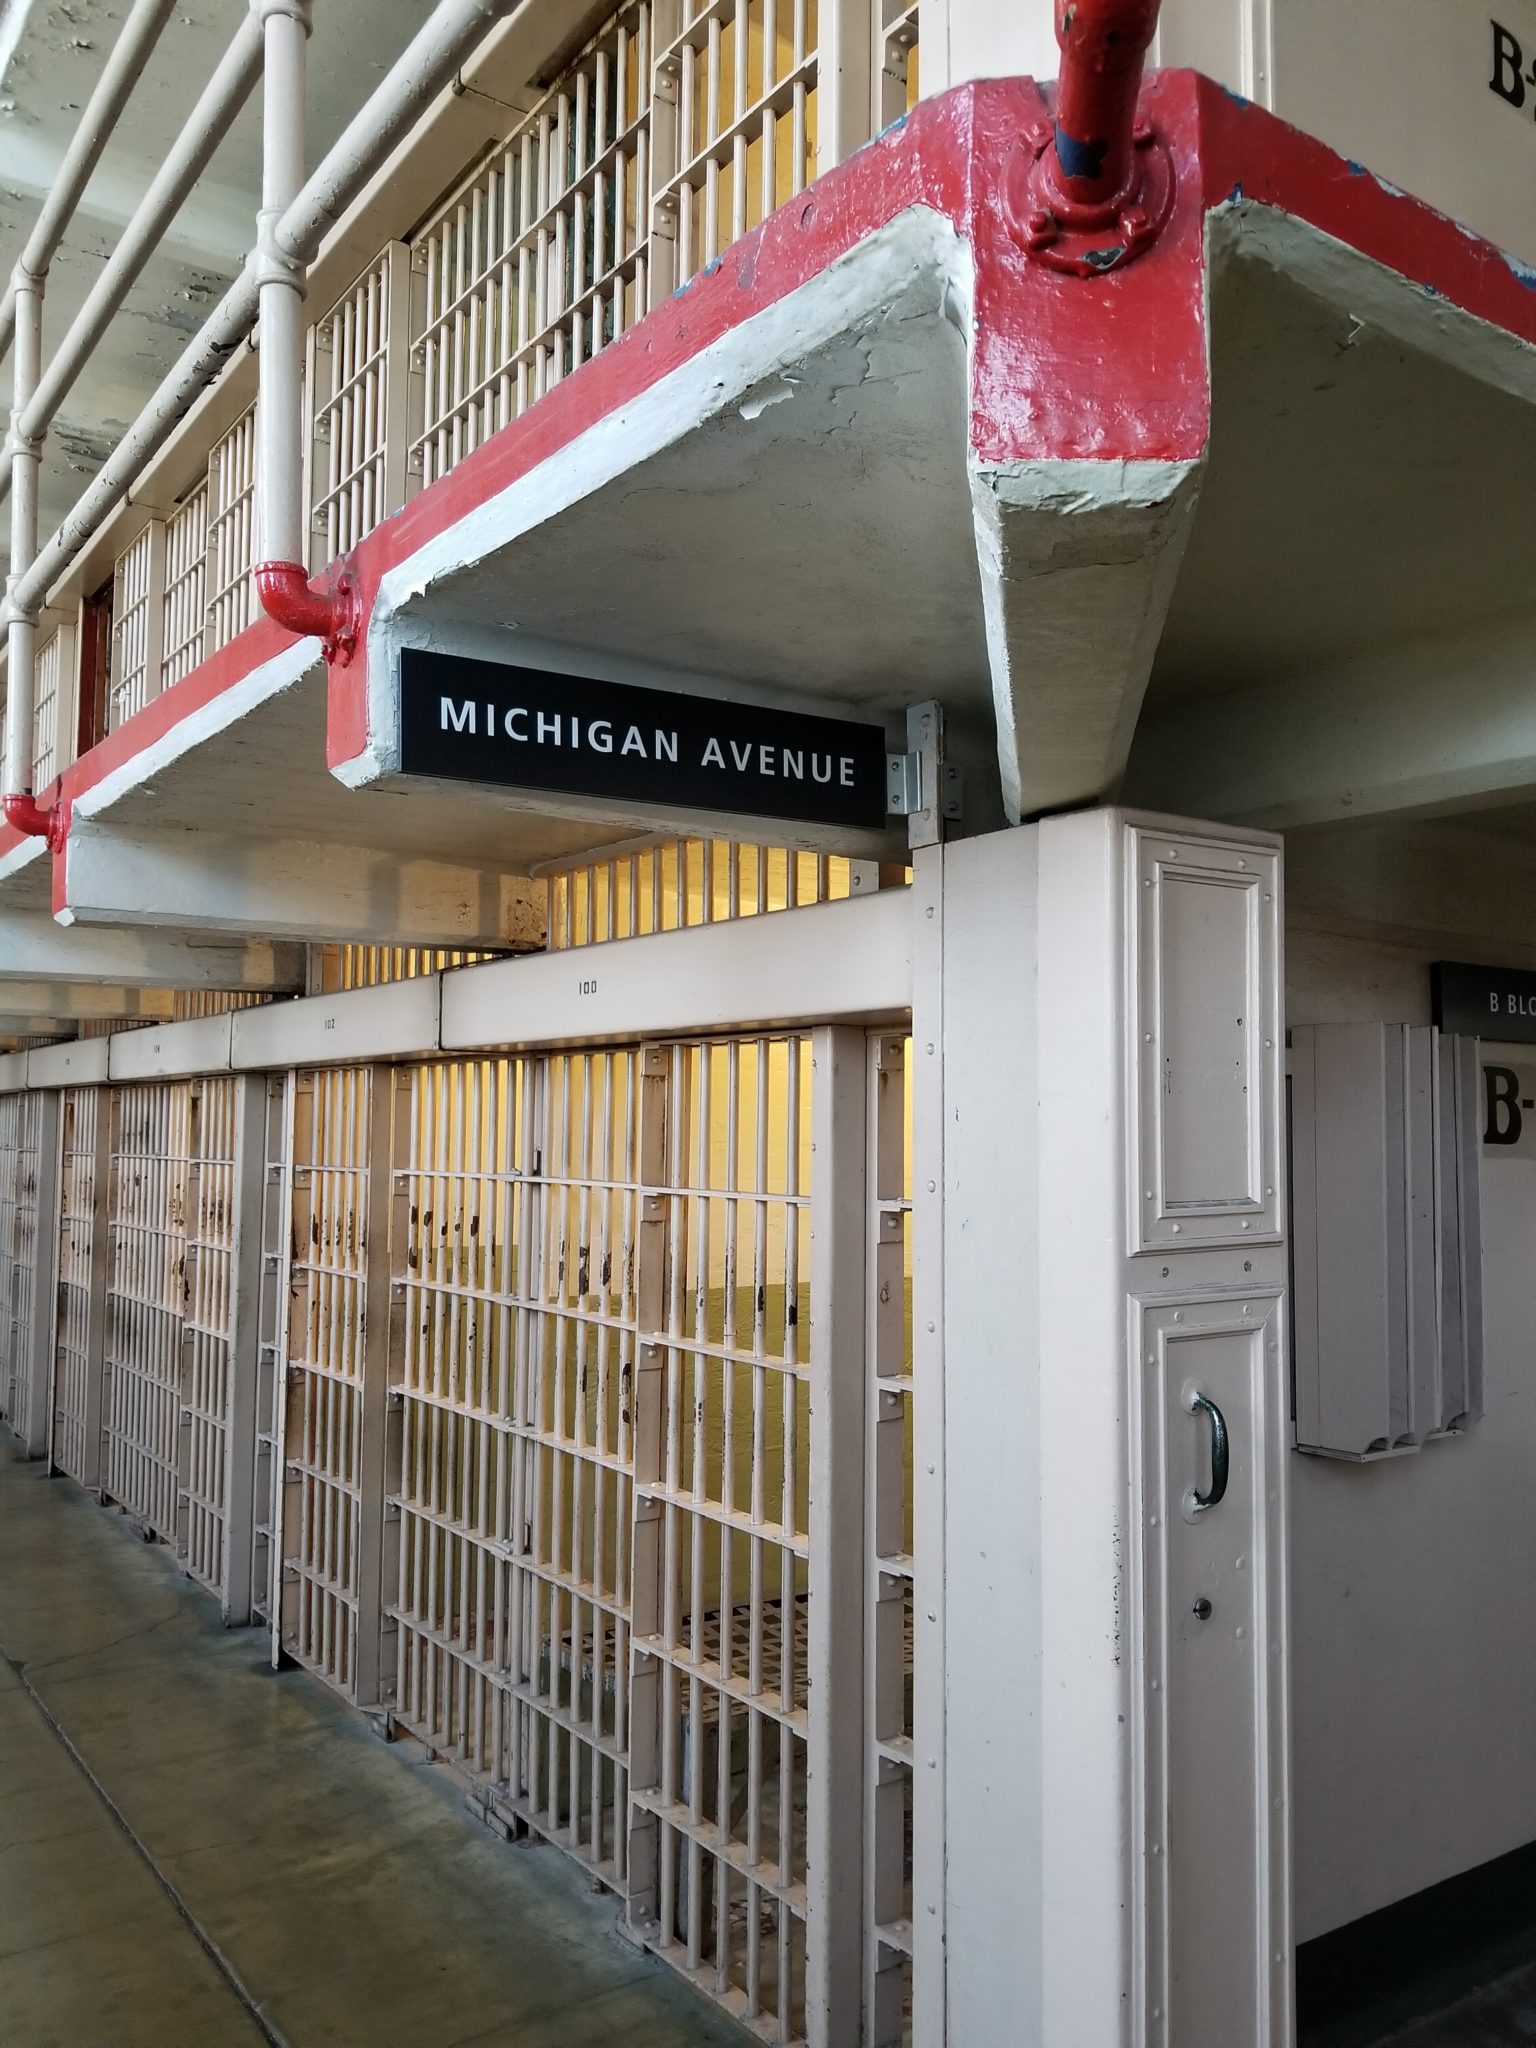 a prison cell block with a sign